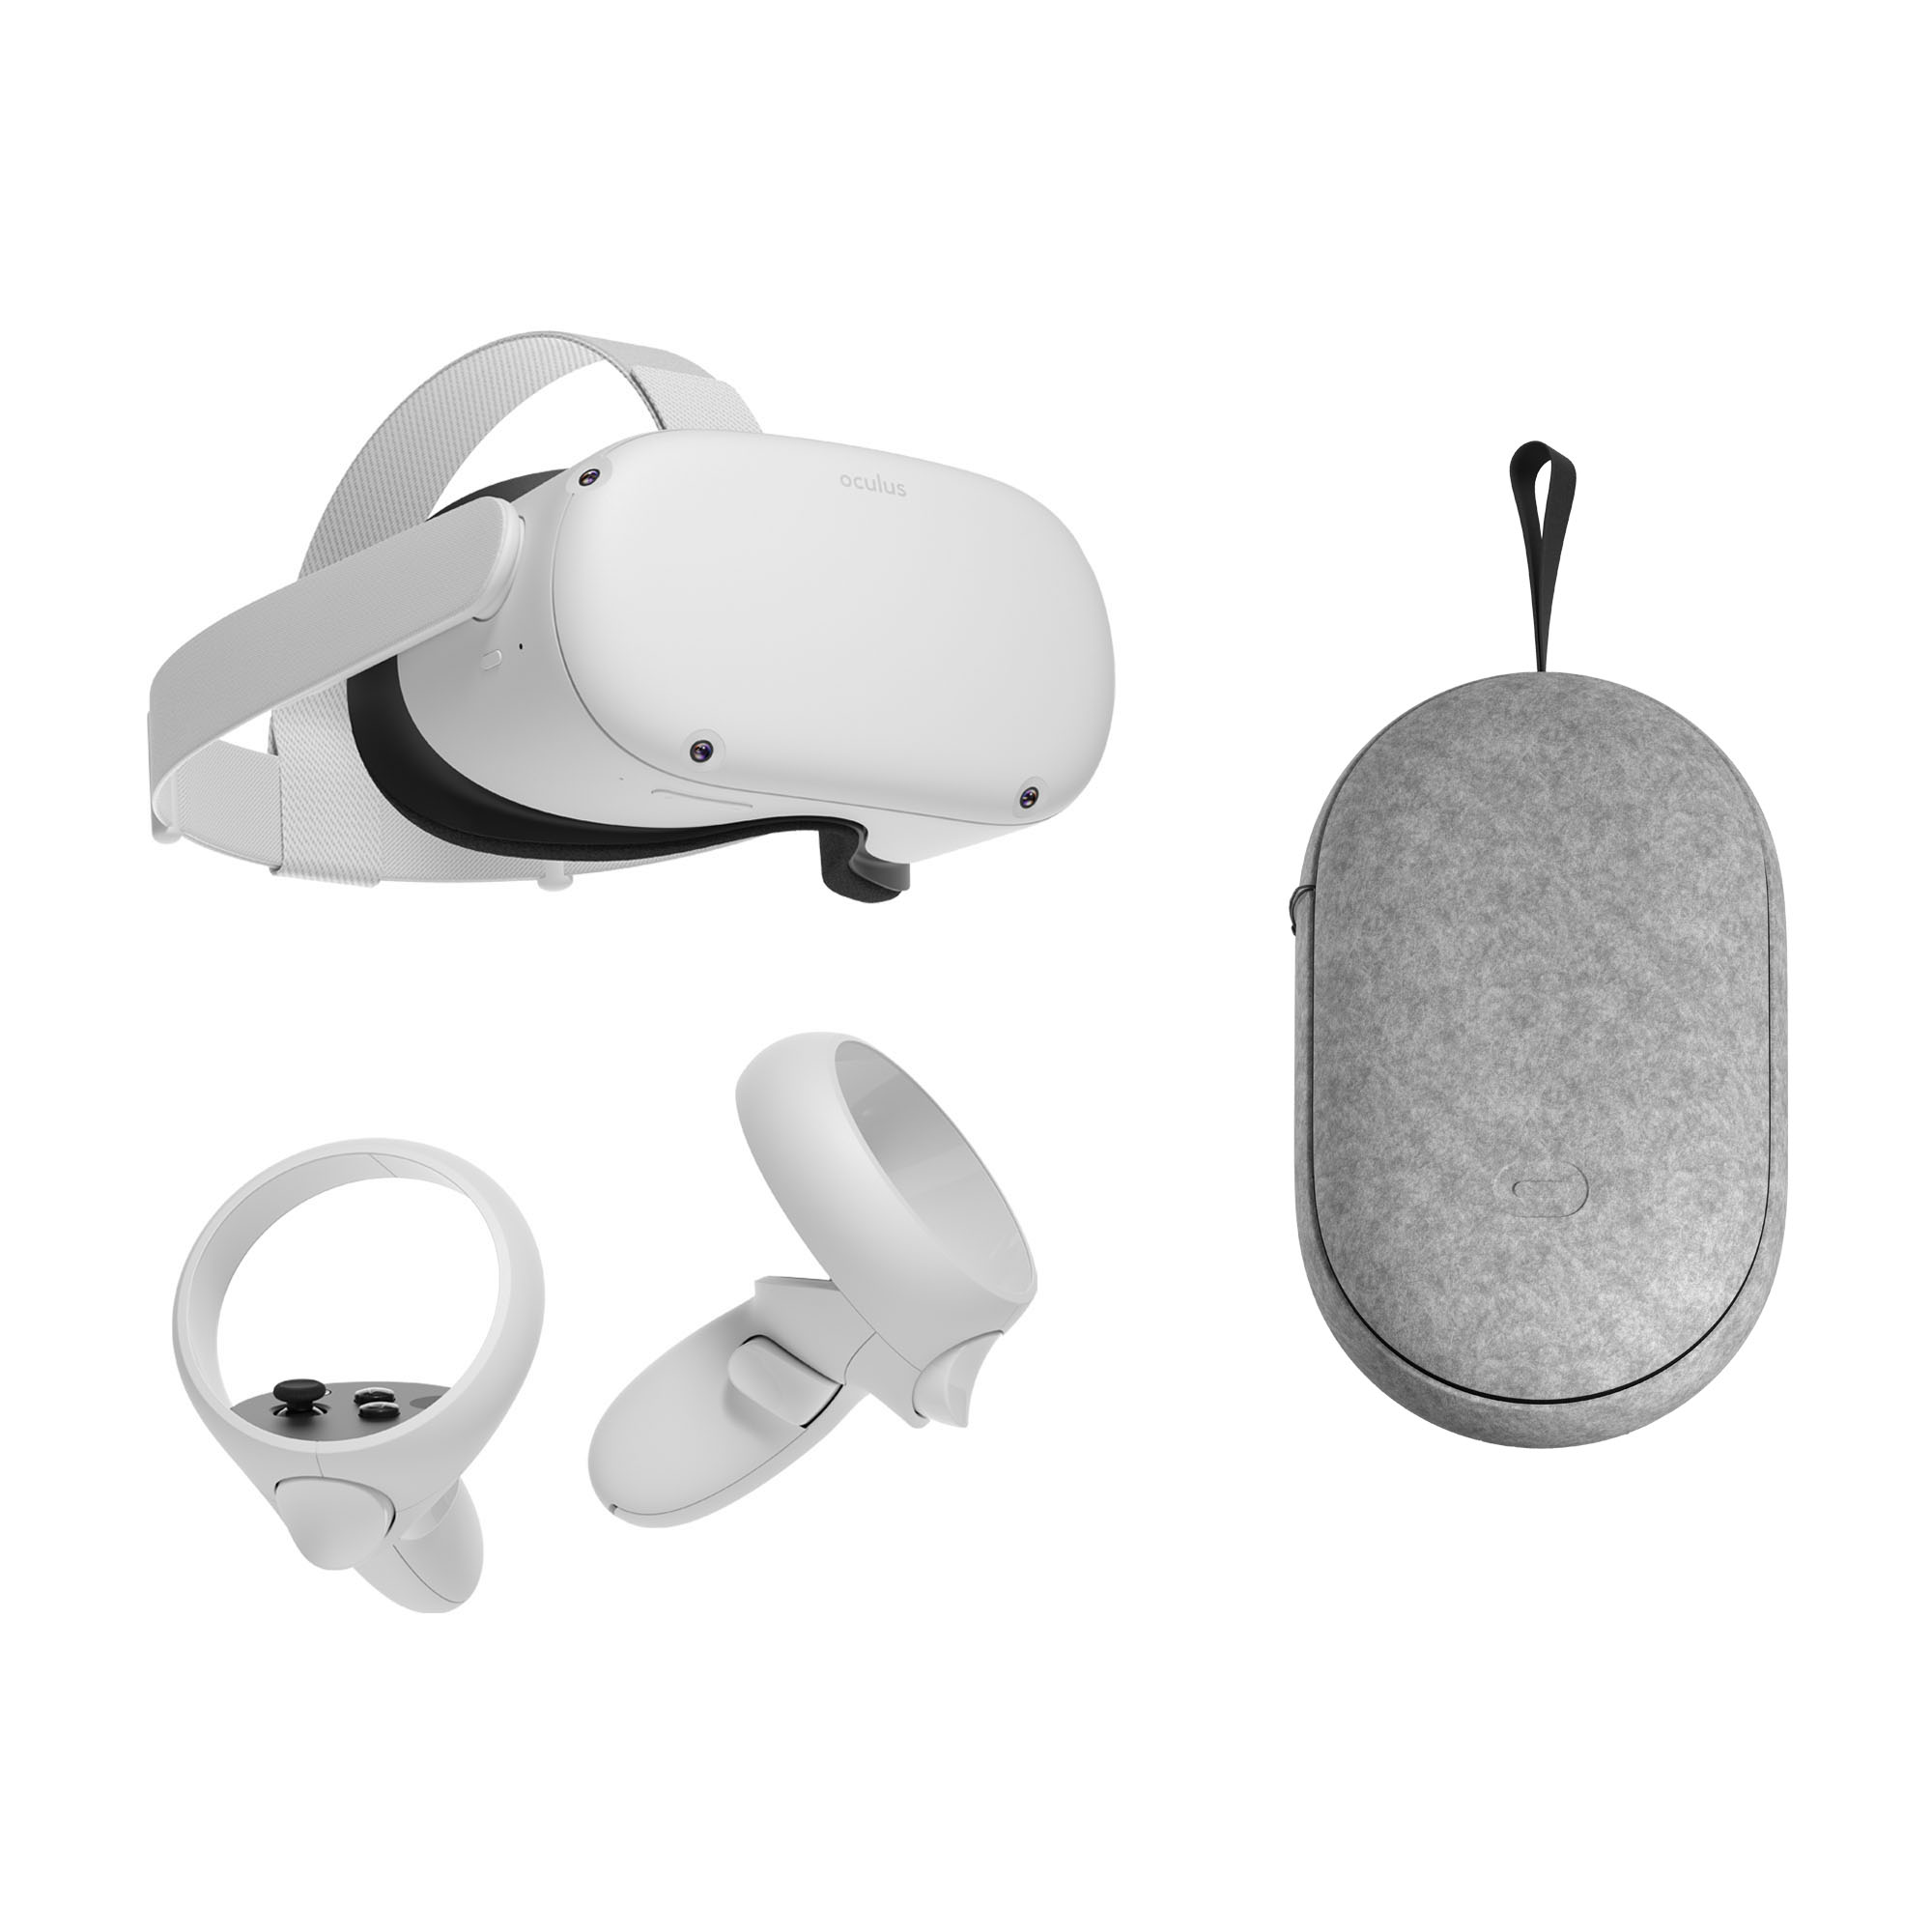 Oculus Quest 2 VR Headset 128 GB + FREE Carrying Case ($49 value) - Walmart.com $299